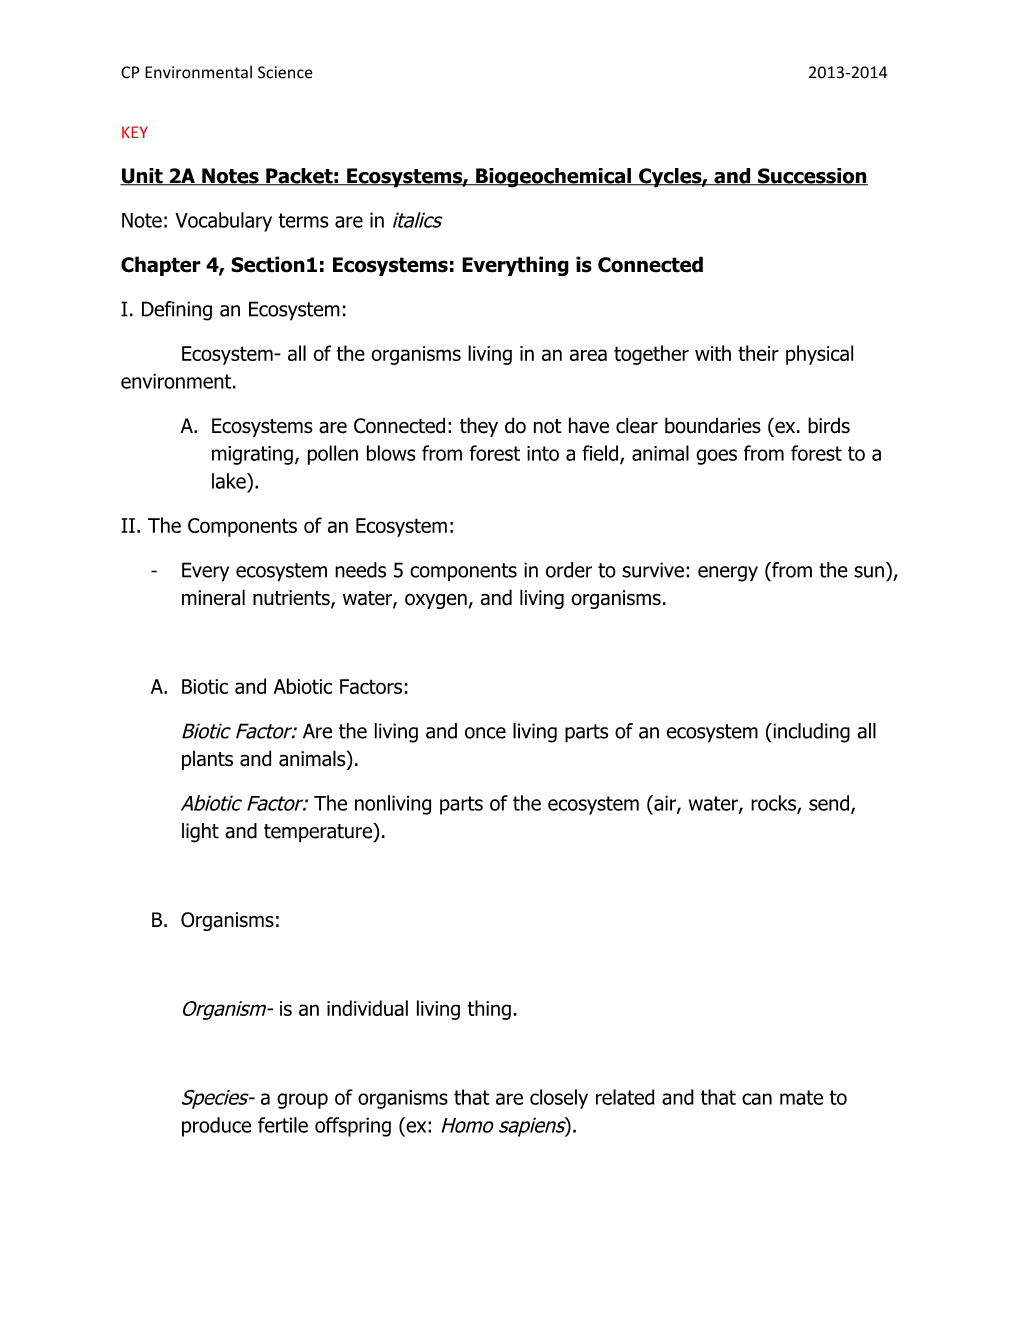 Unit 2A Notes Packet: Ecosystems, Biogeochemical Cycles, and Succession